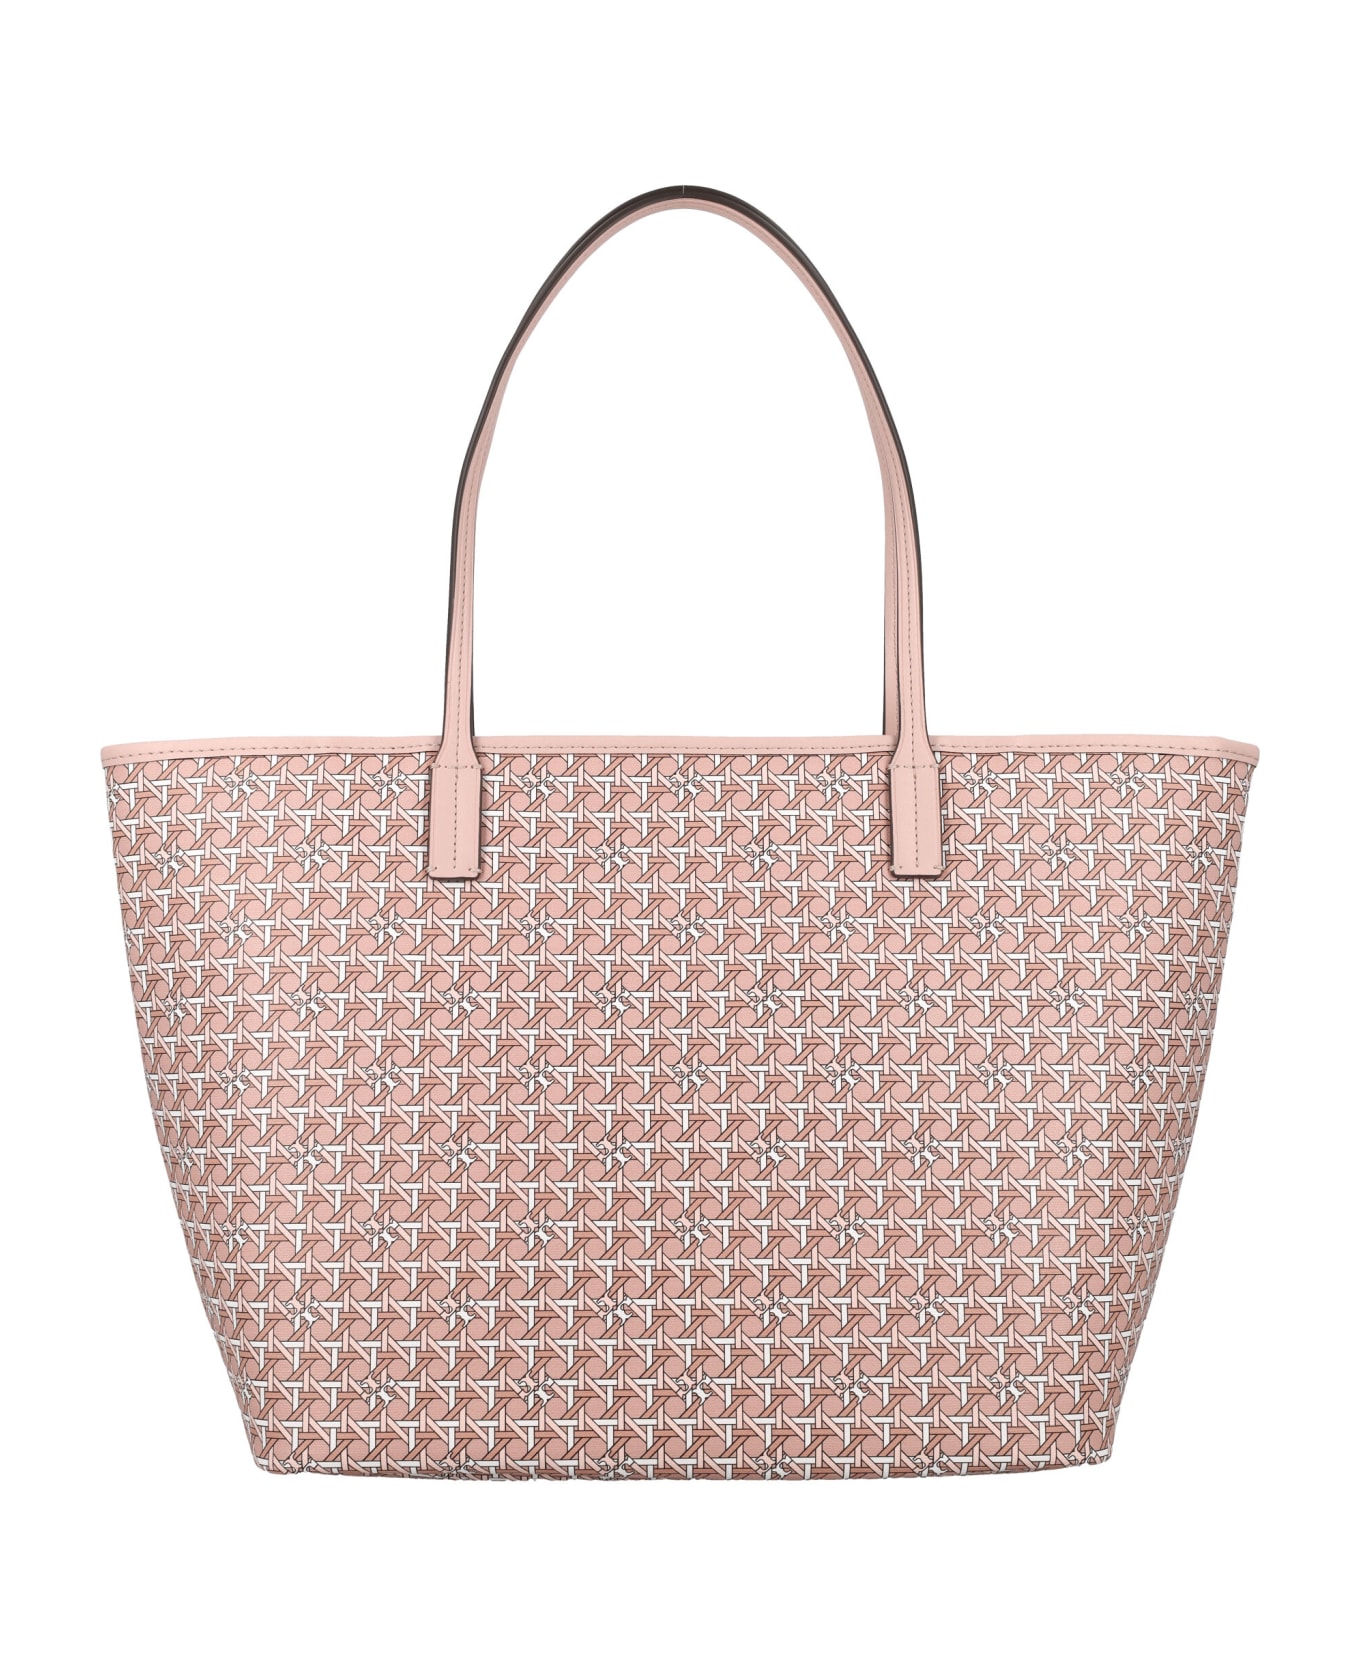 Tory Burch Ever-ready Tote - WINTER PEACH トートバッグ